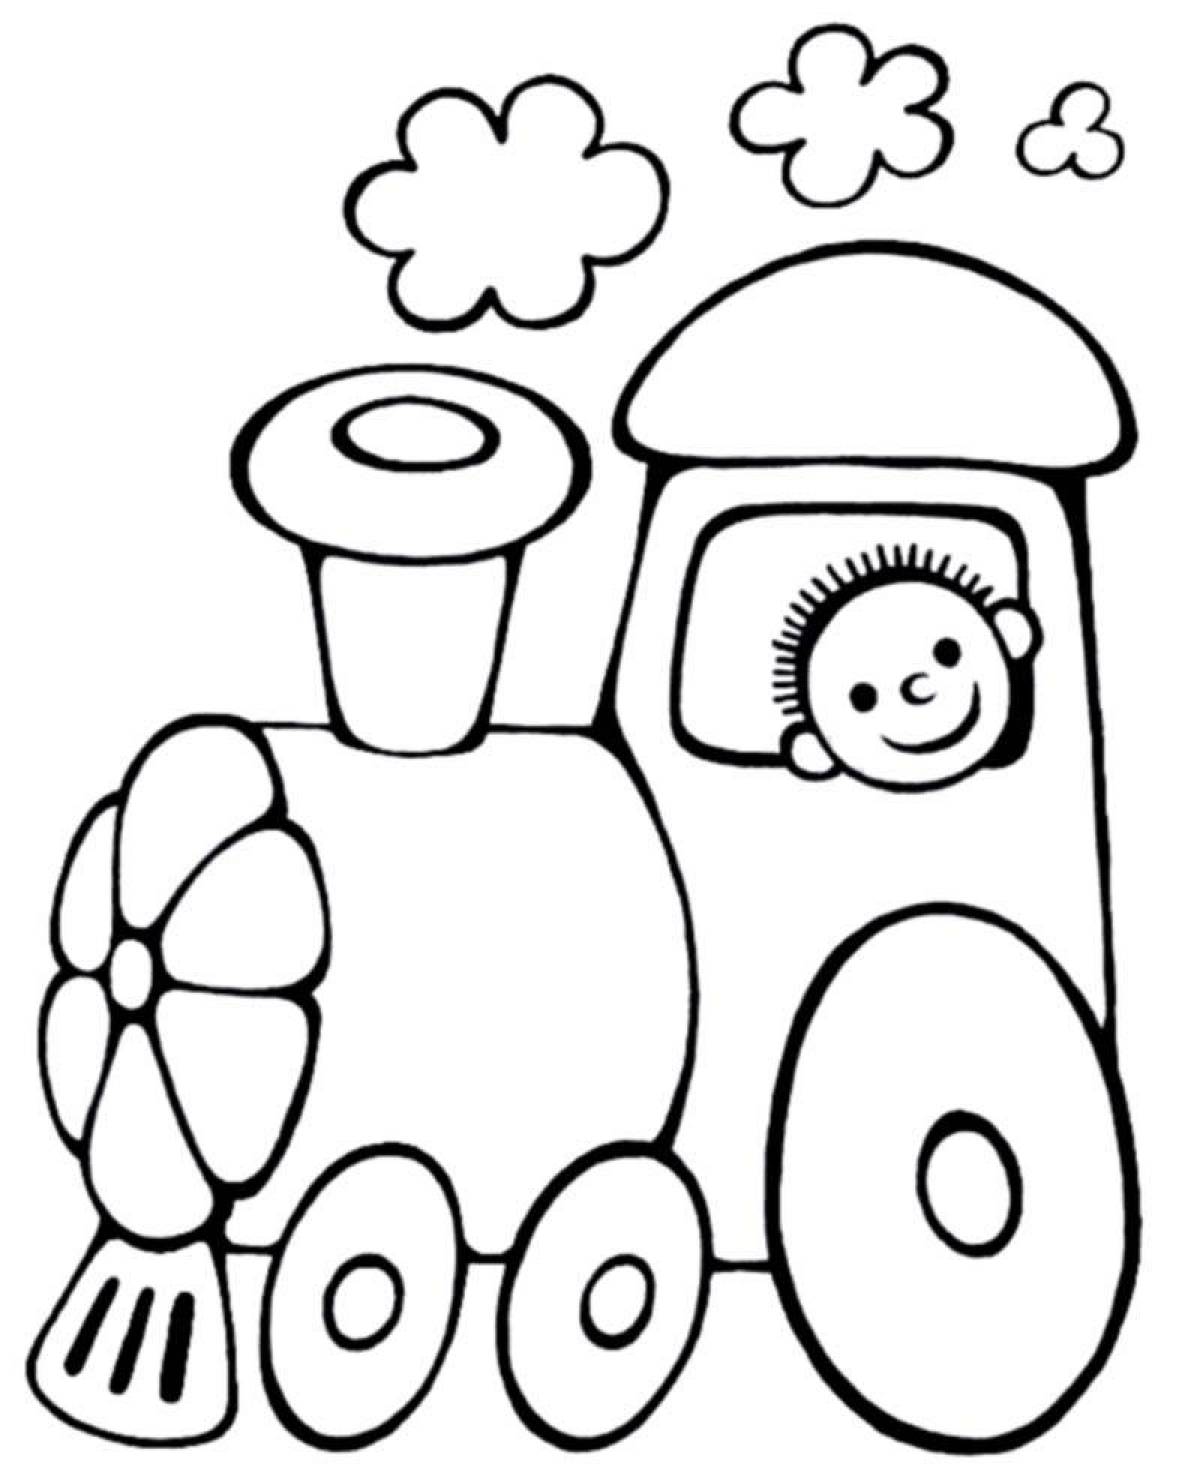 Colorful coloring book for toddlers 2 3